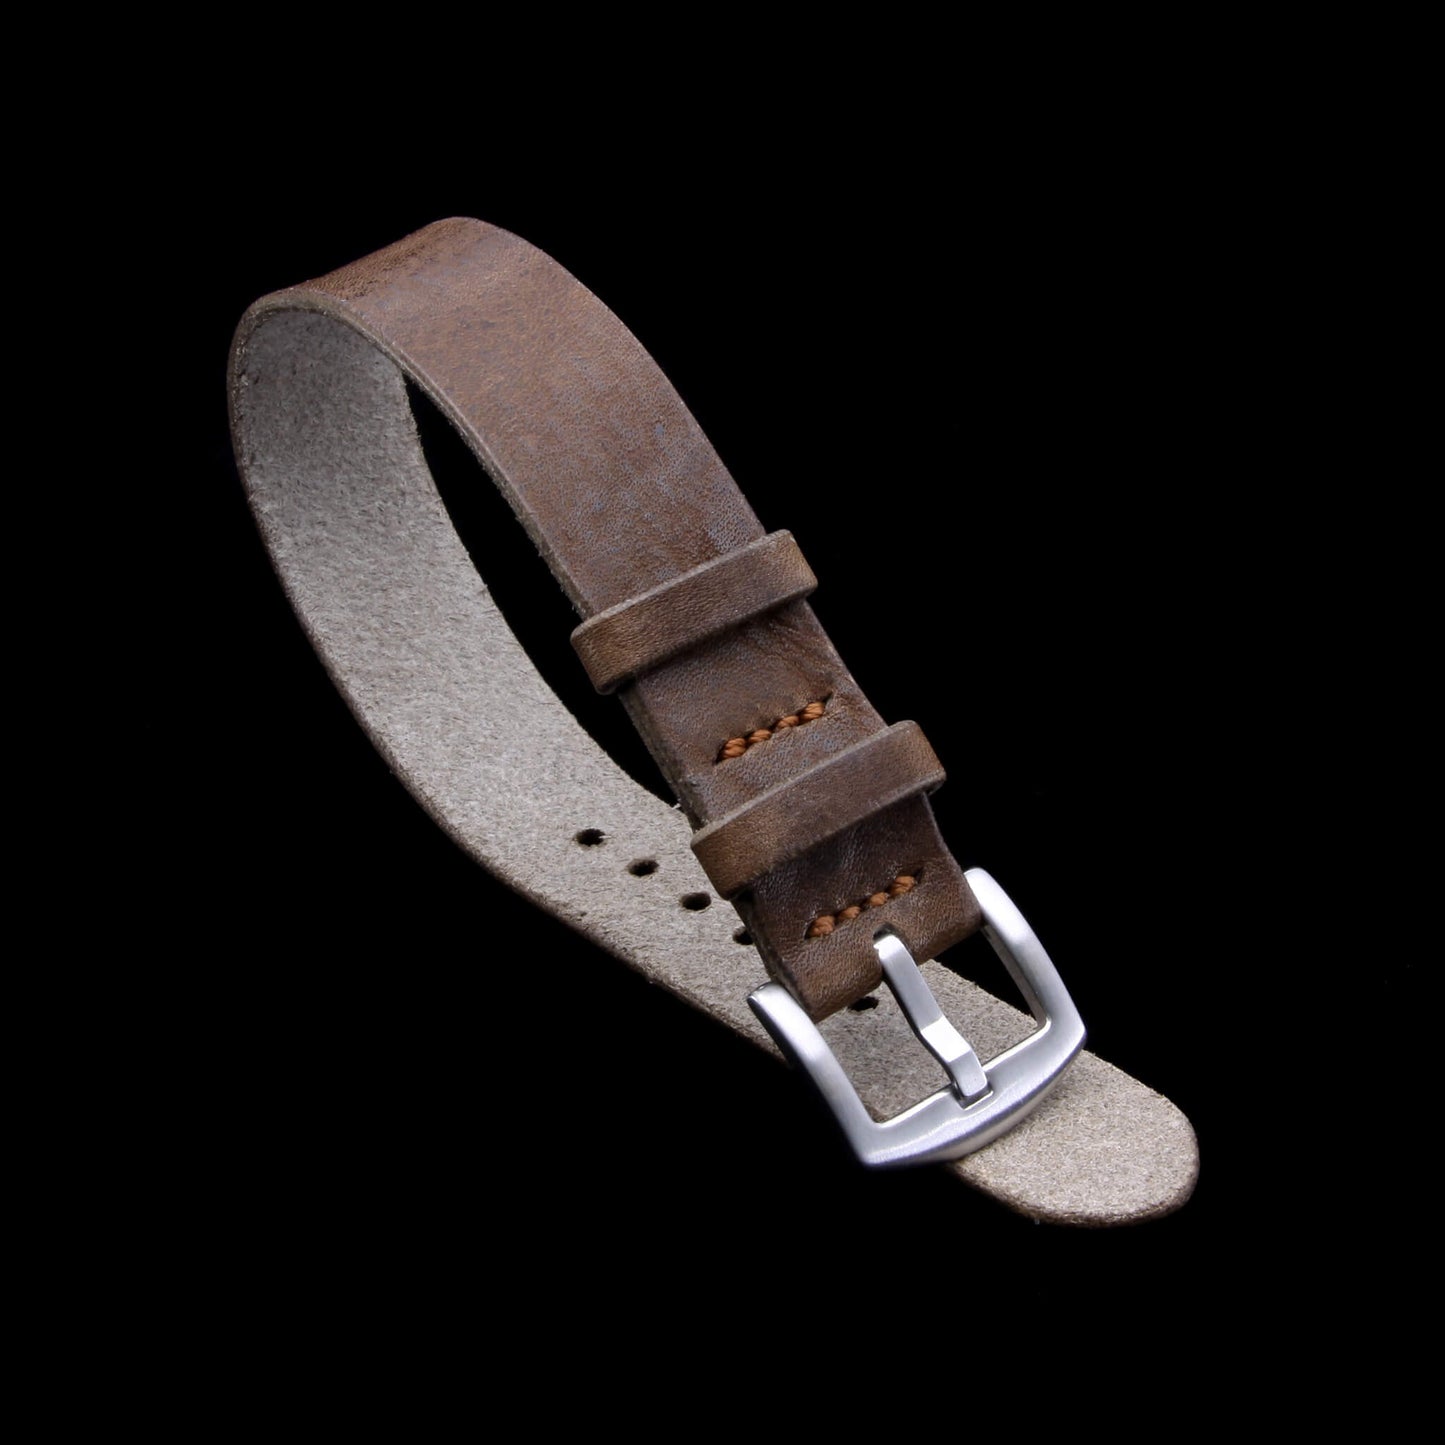 Single Pass Leather Watch Strap, 2-Keeper Style Vintage 404 | Full Grain Italian Vegetable-Tanned Leather | Cozy Handmade